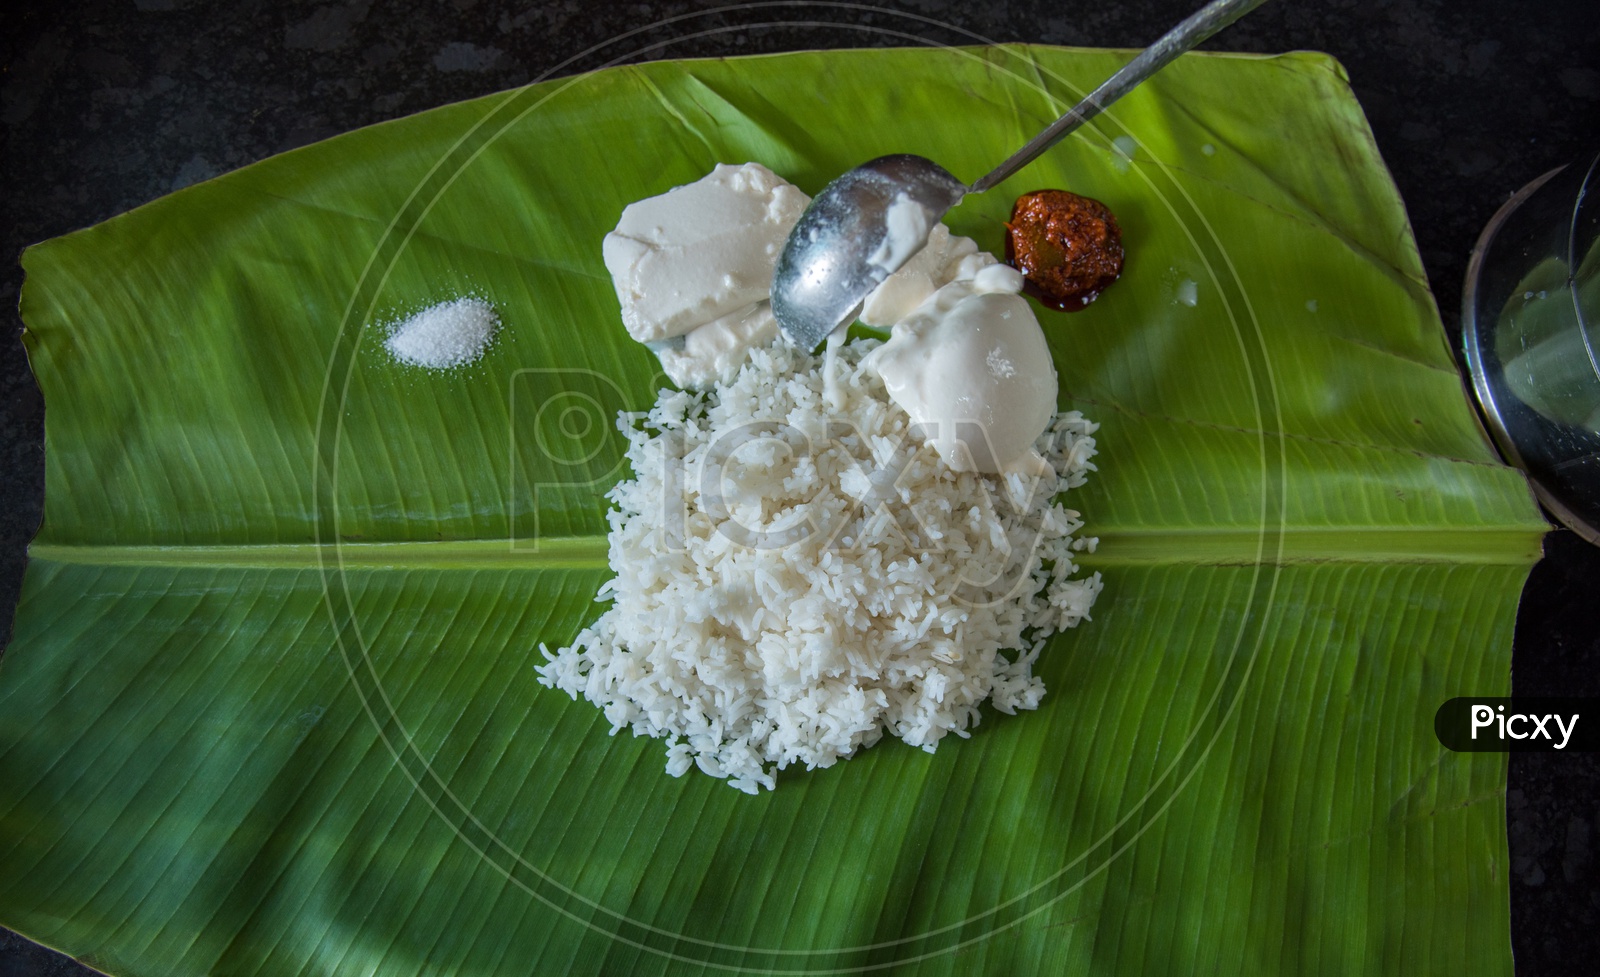 Curd being put on a Banana leaf(indian traditional plate)